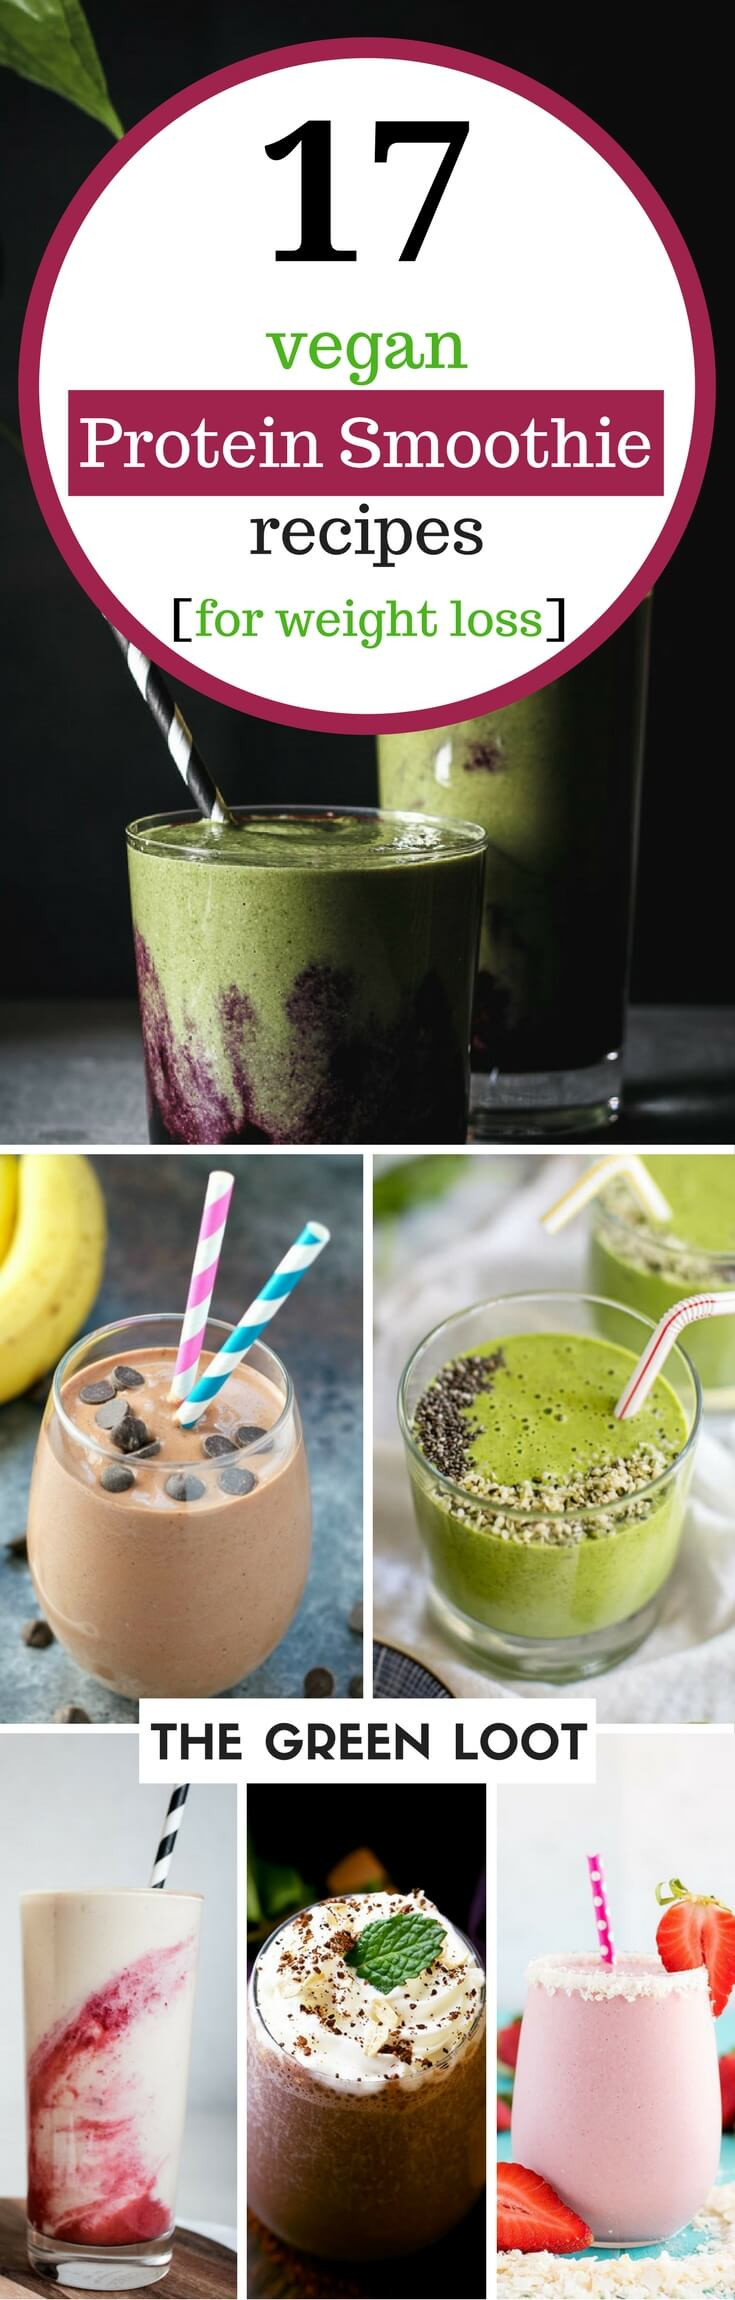 Protein Smoothie Recipes For Weight Loss
 17 Tasty Vegan Protein Smoothie Recipes for Weight Loss